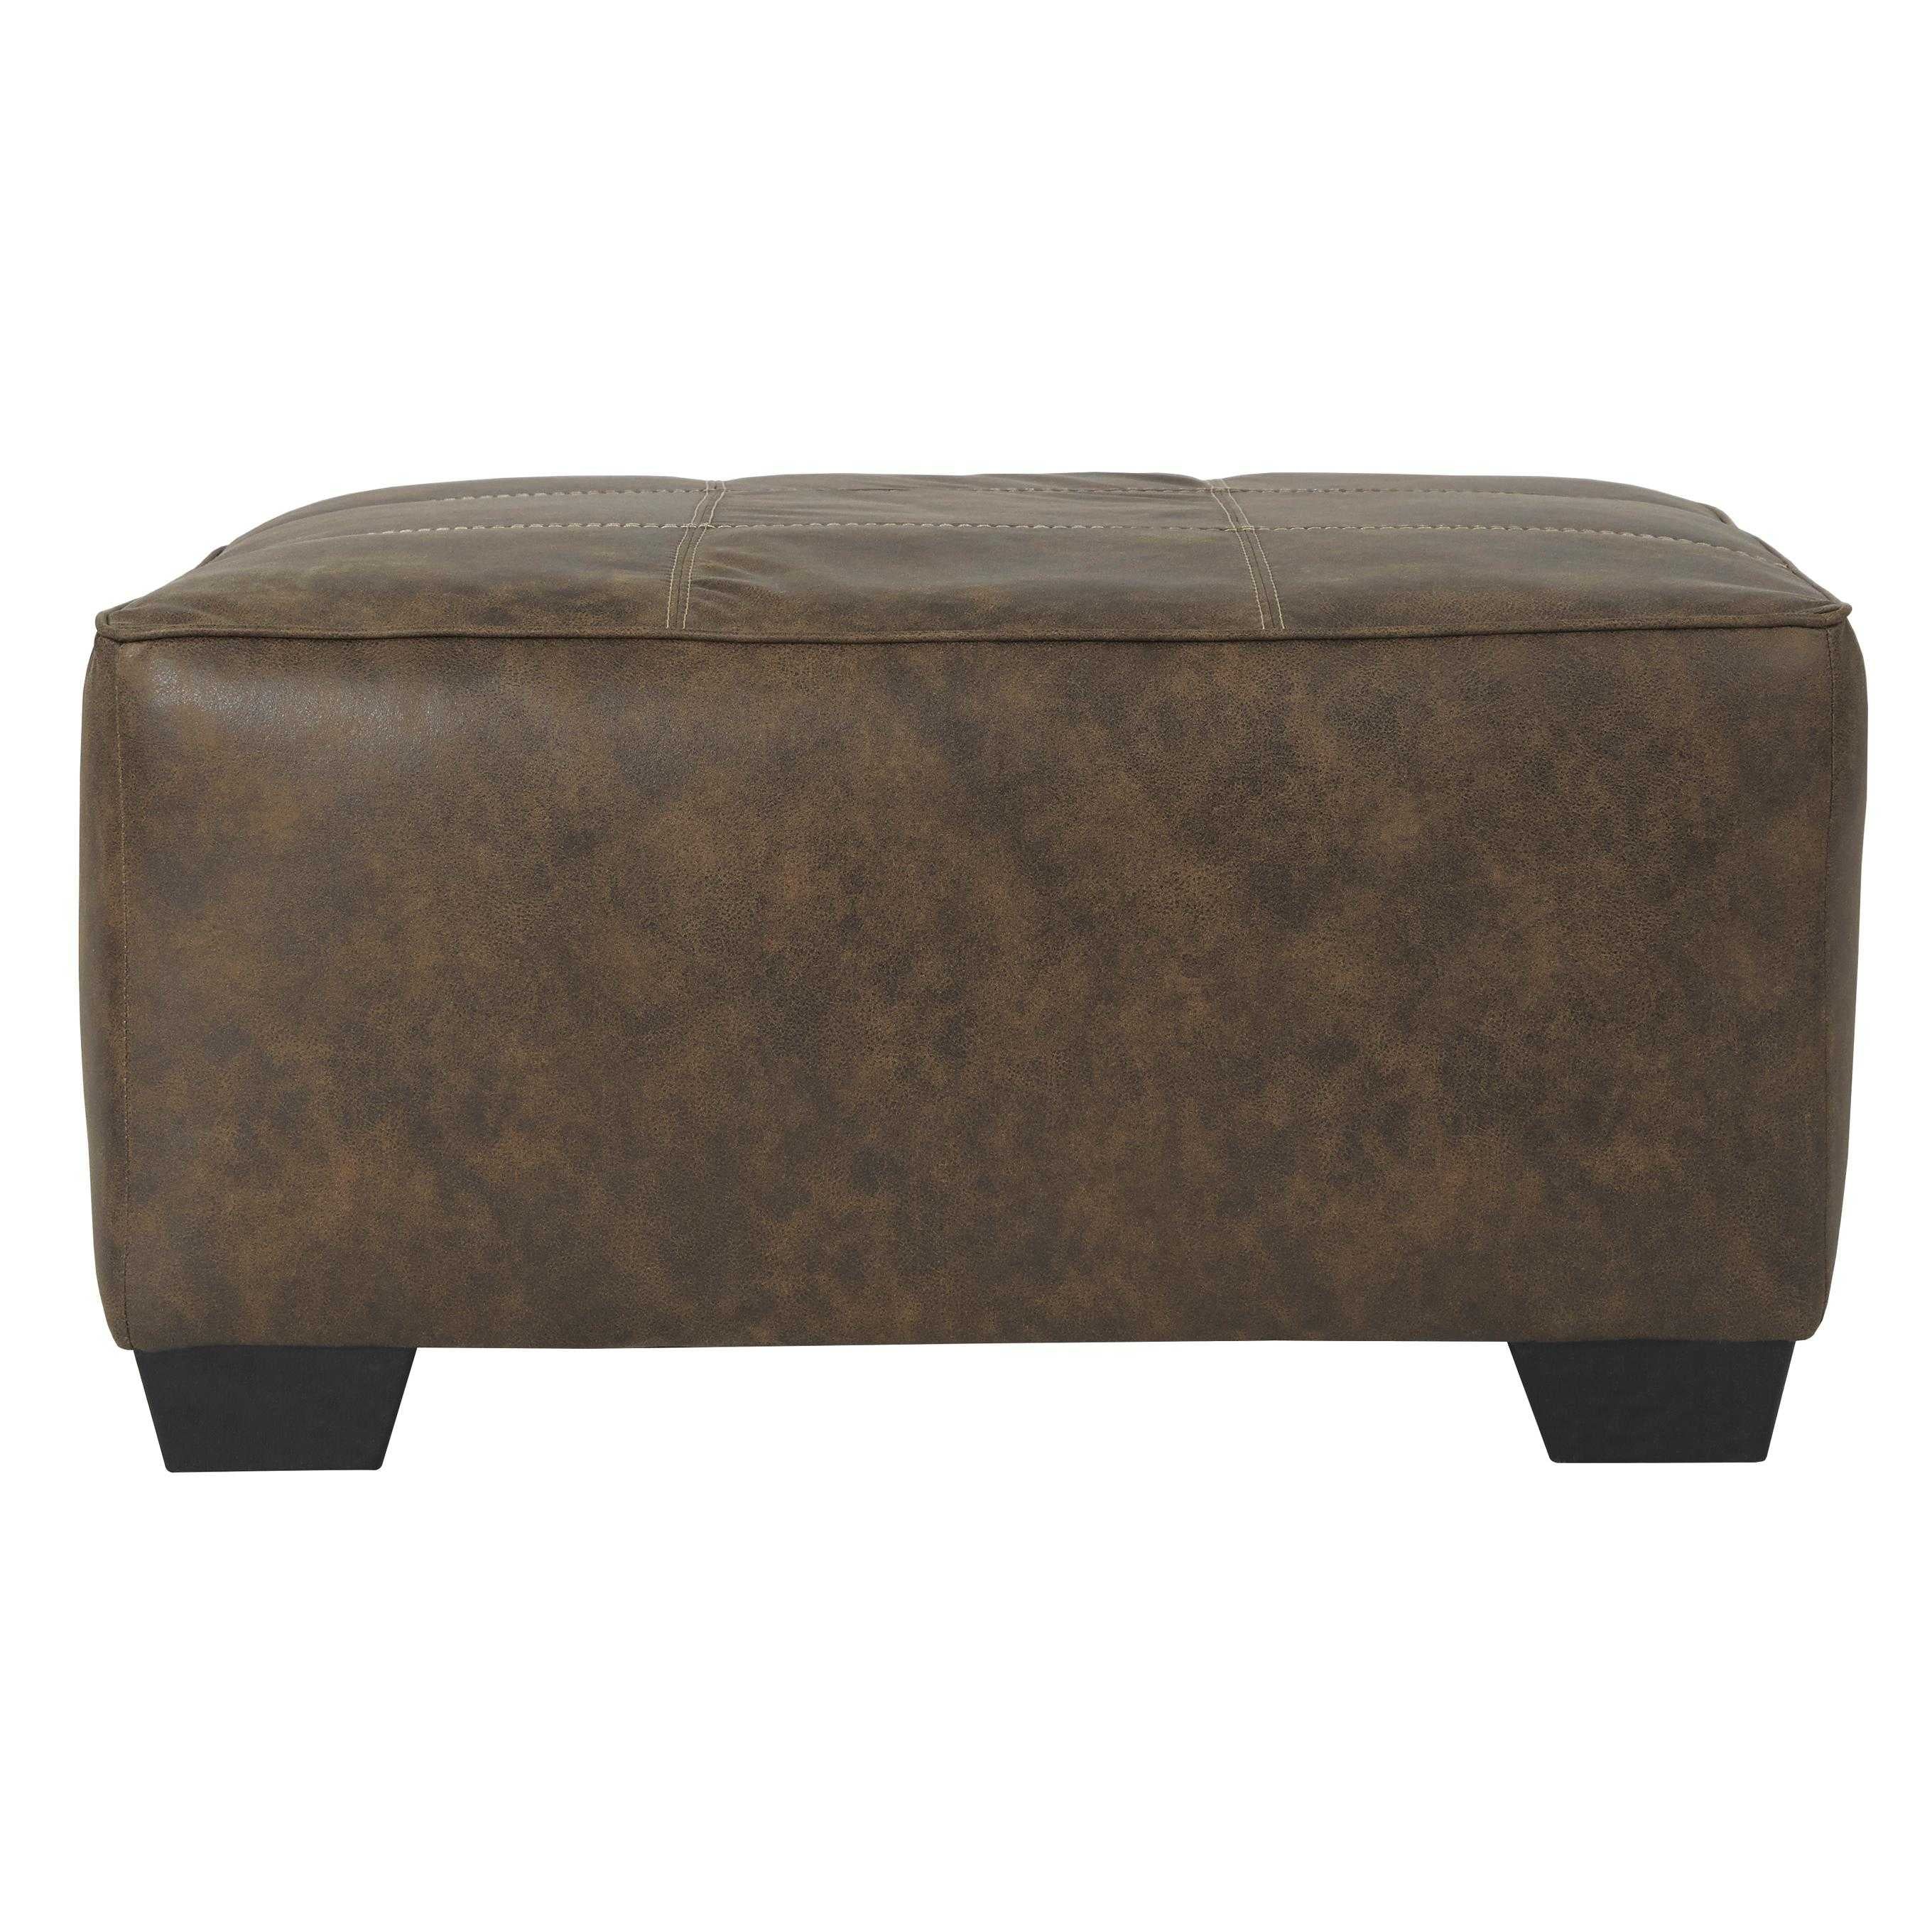 Benchcraft Abalone Leather Look Ottoman 9130208